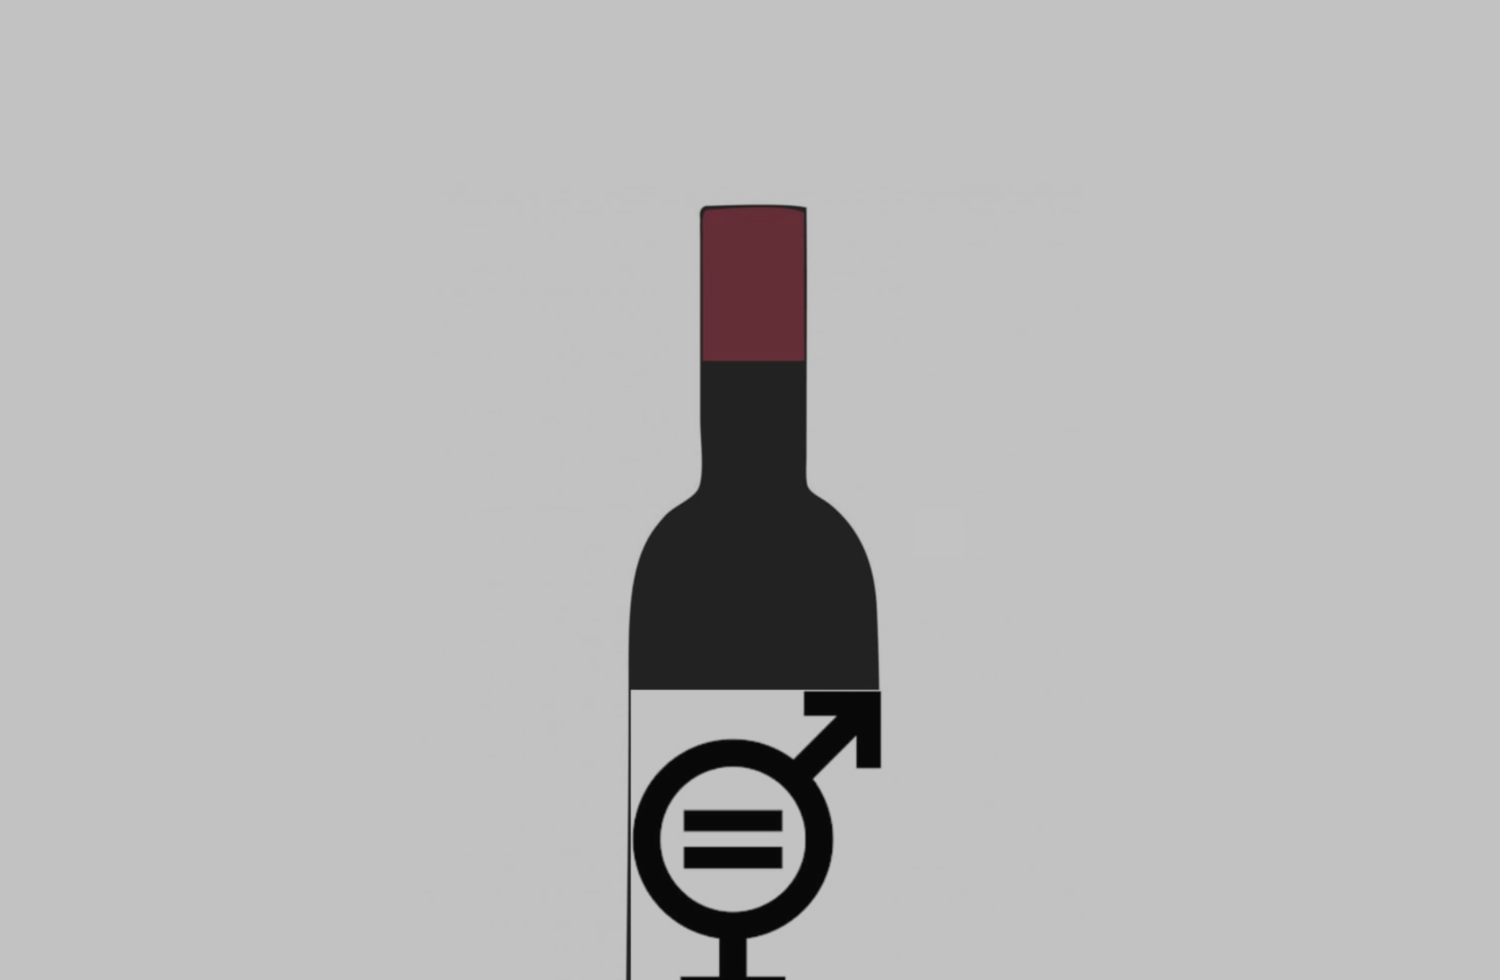 Graphic of a simple wine bottle in front of a grey background